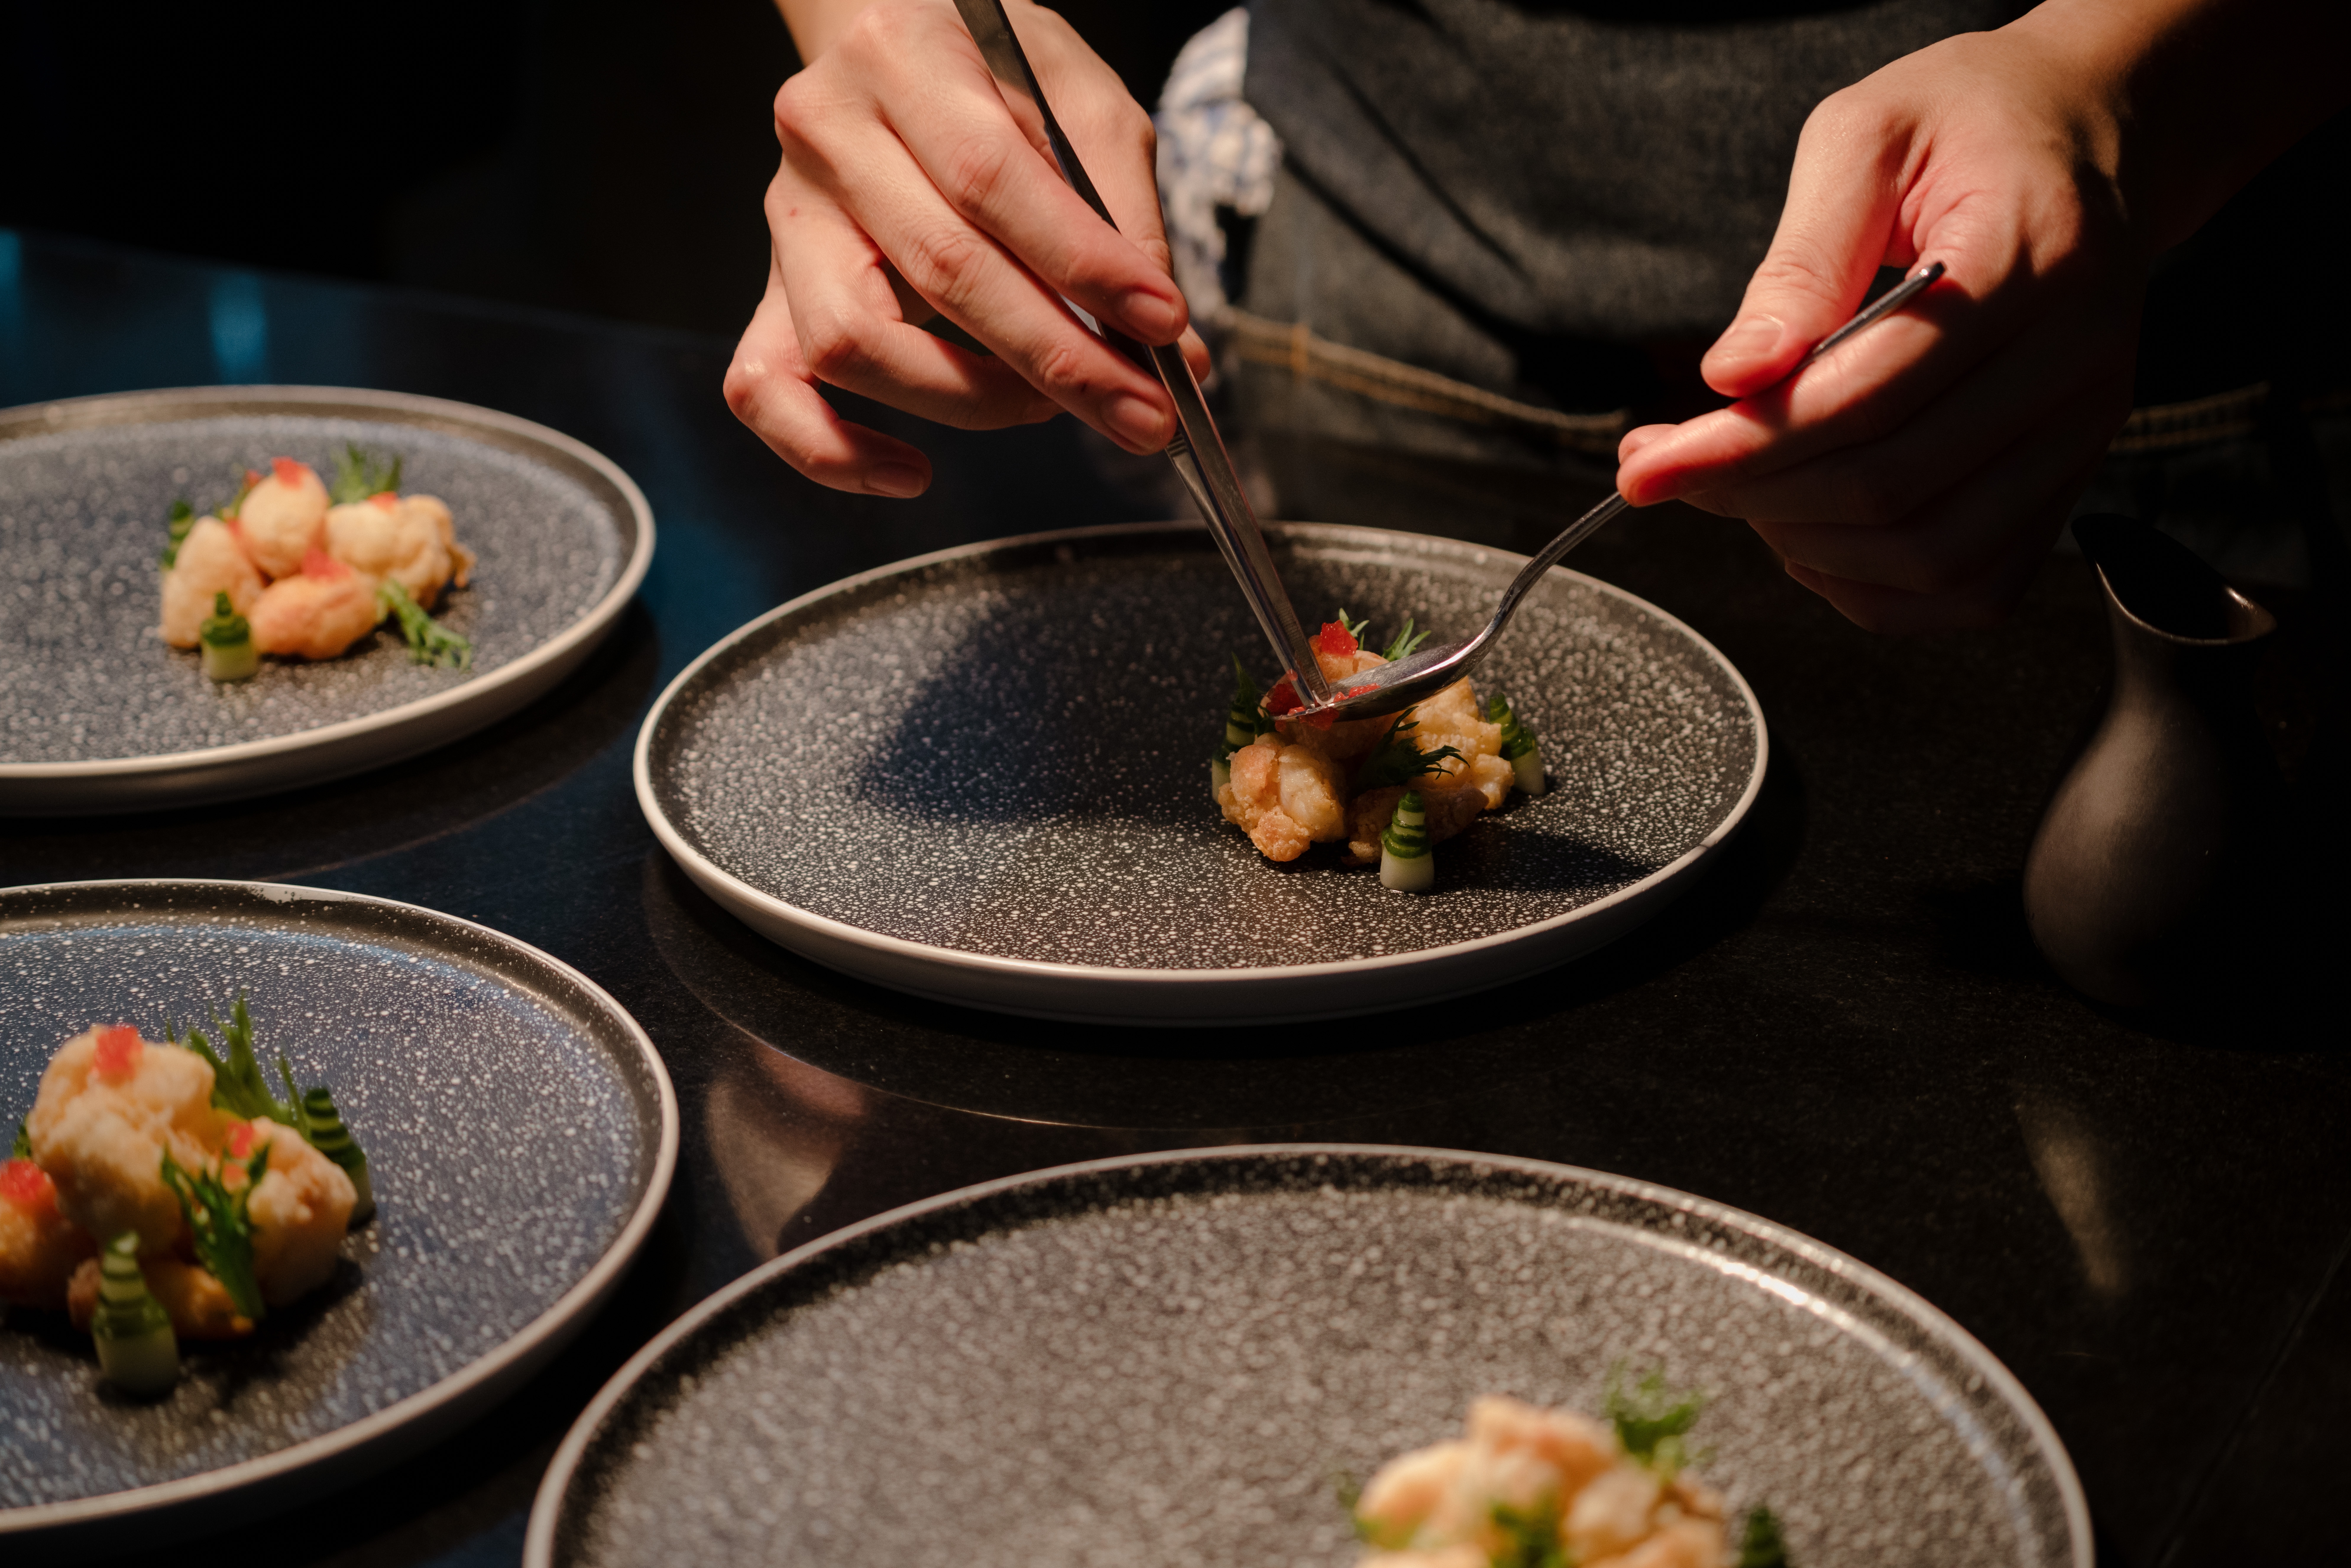 Plates being prepared in the kitchen of a fine dining restaurant | Source: Shutterstock